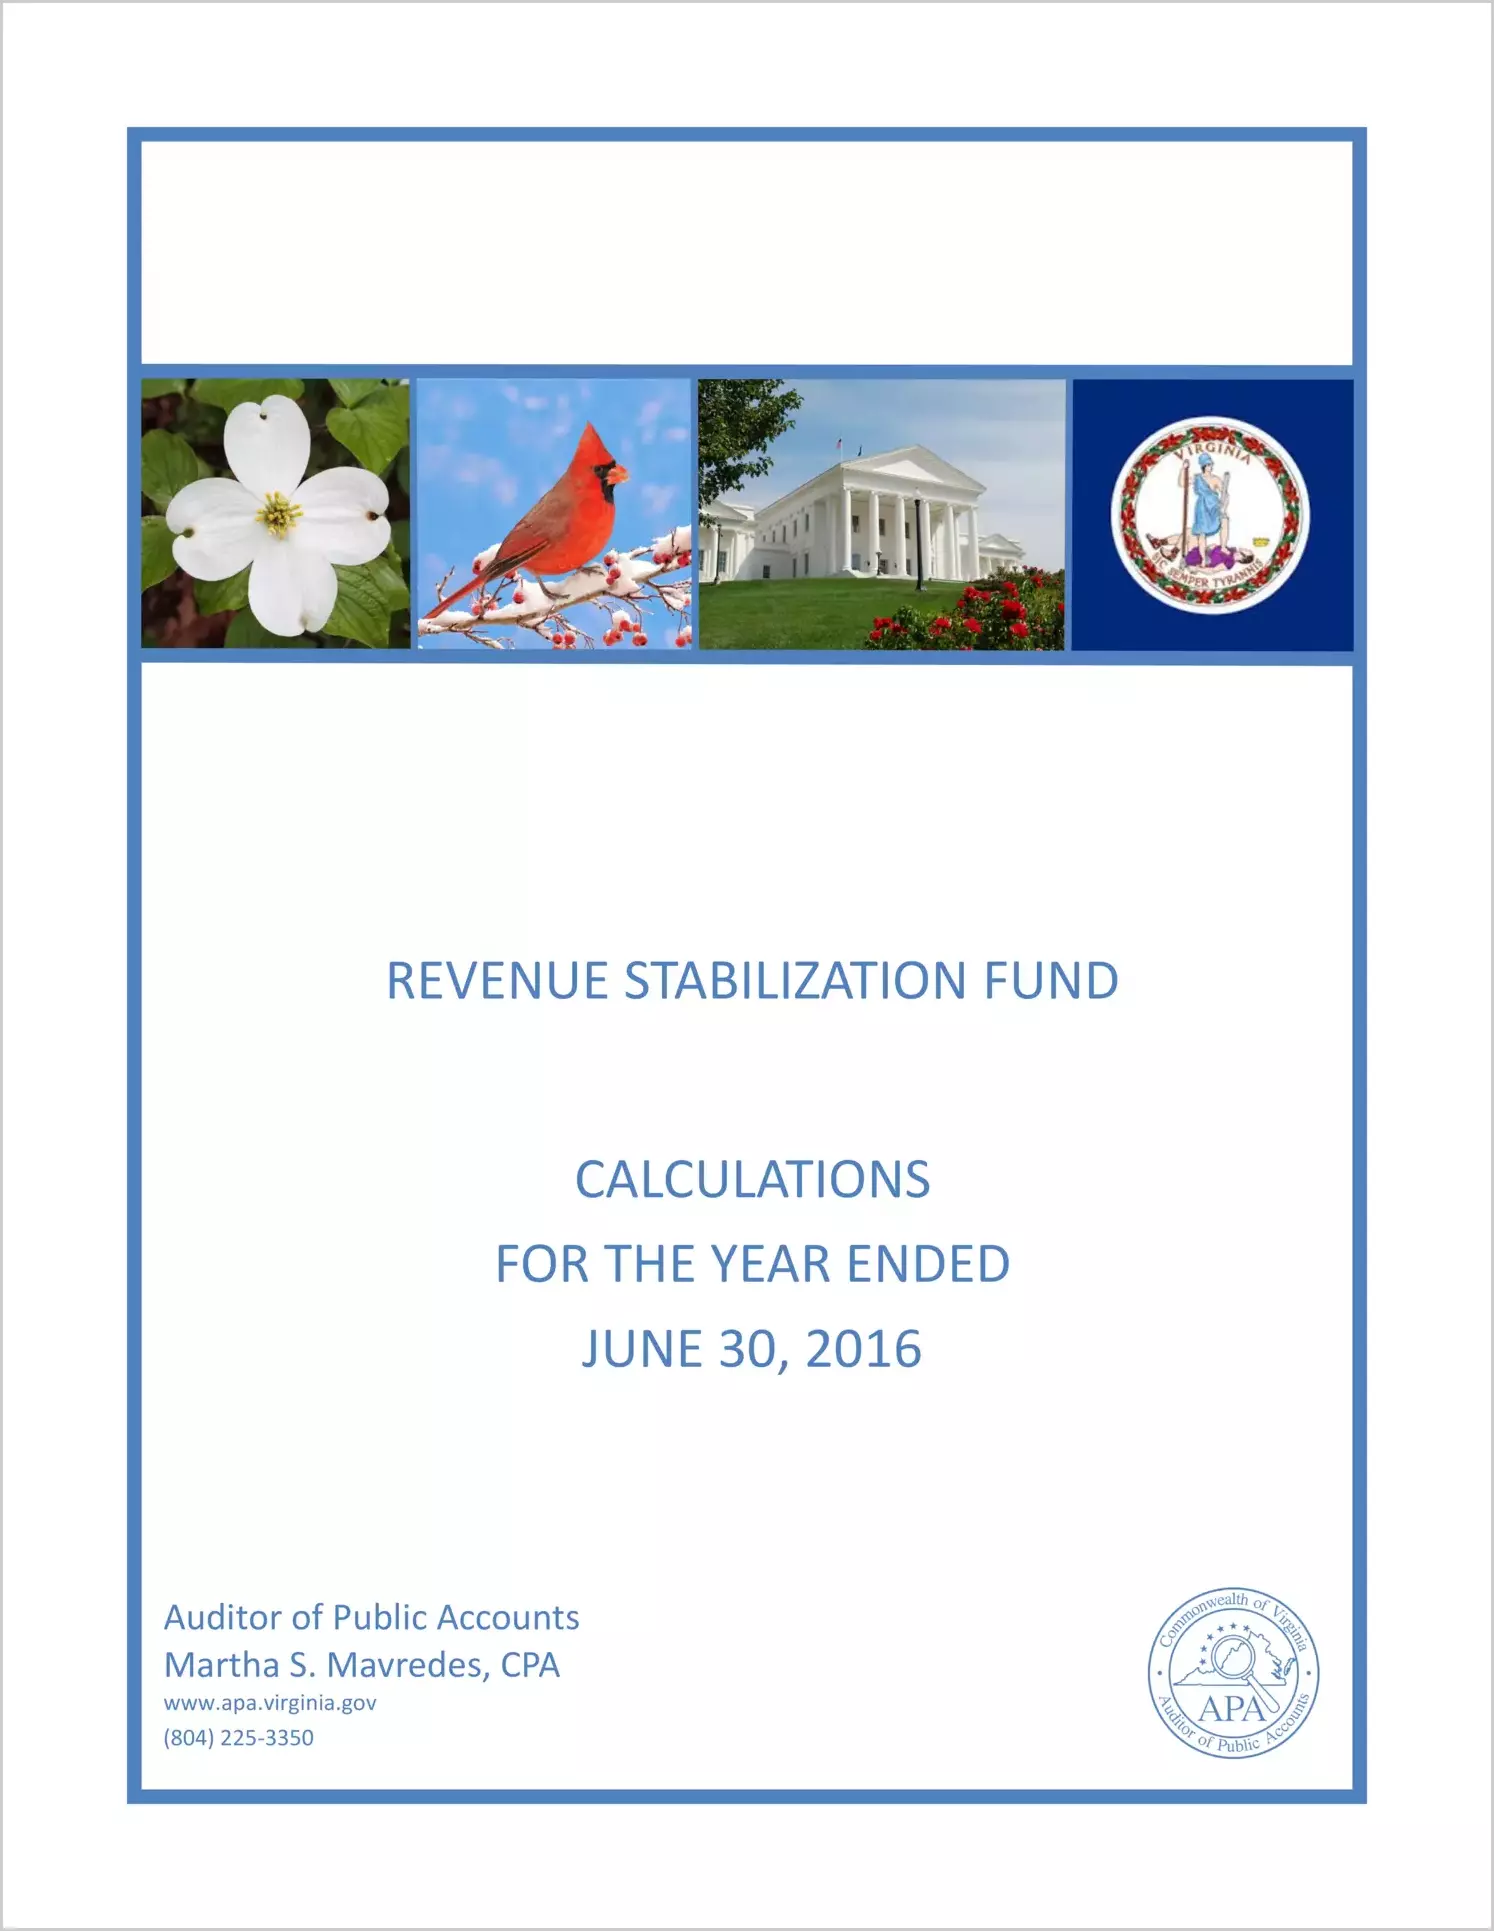 Revenue Stabilization Fund Calculations for the year ended June 30, 2016